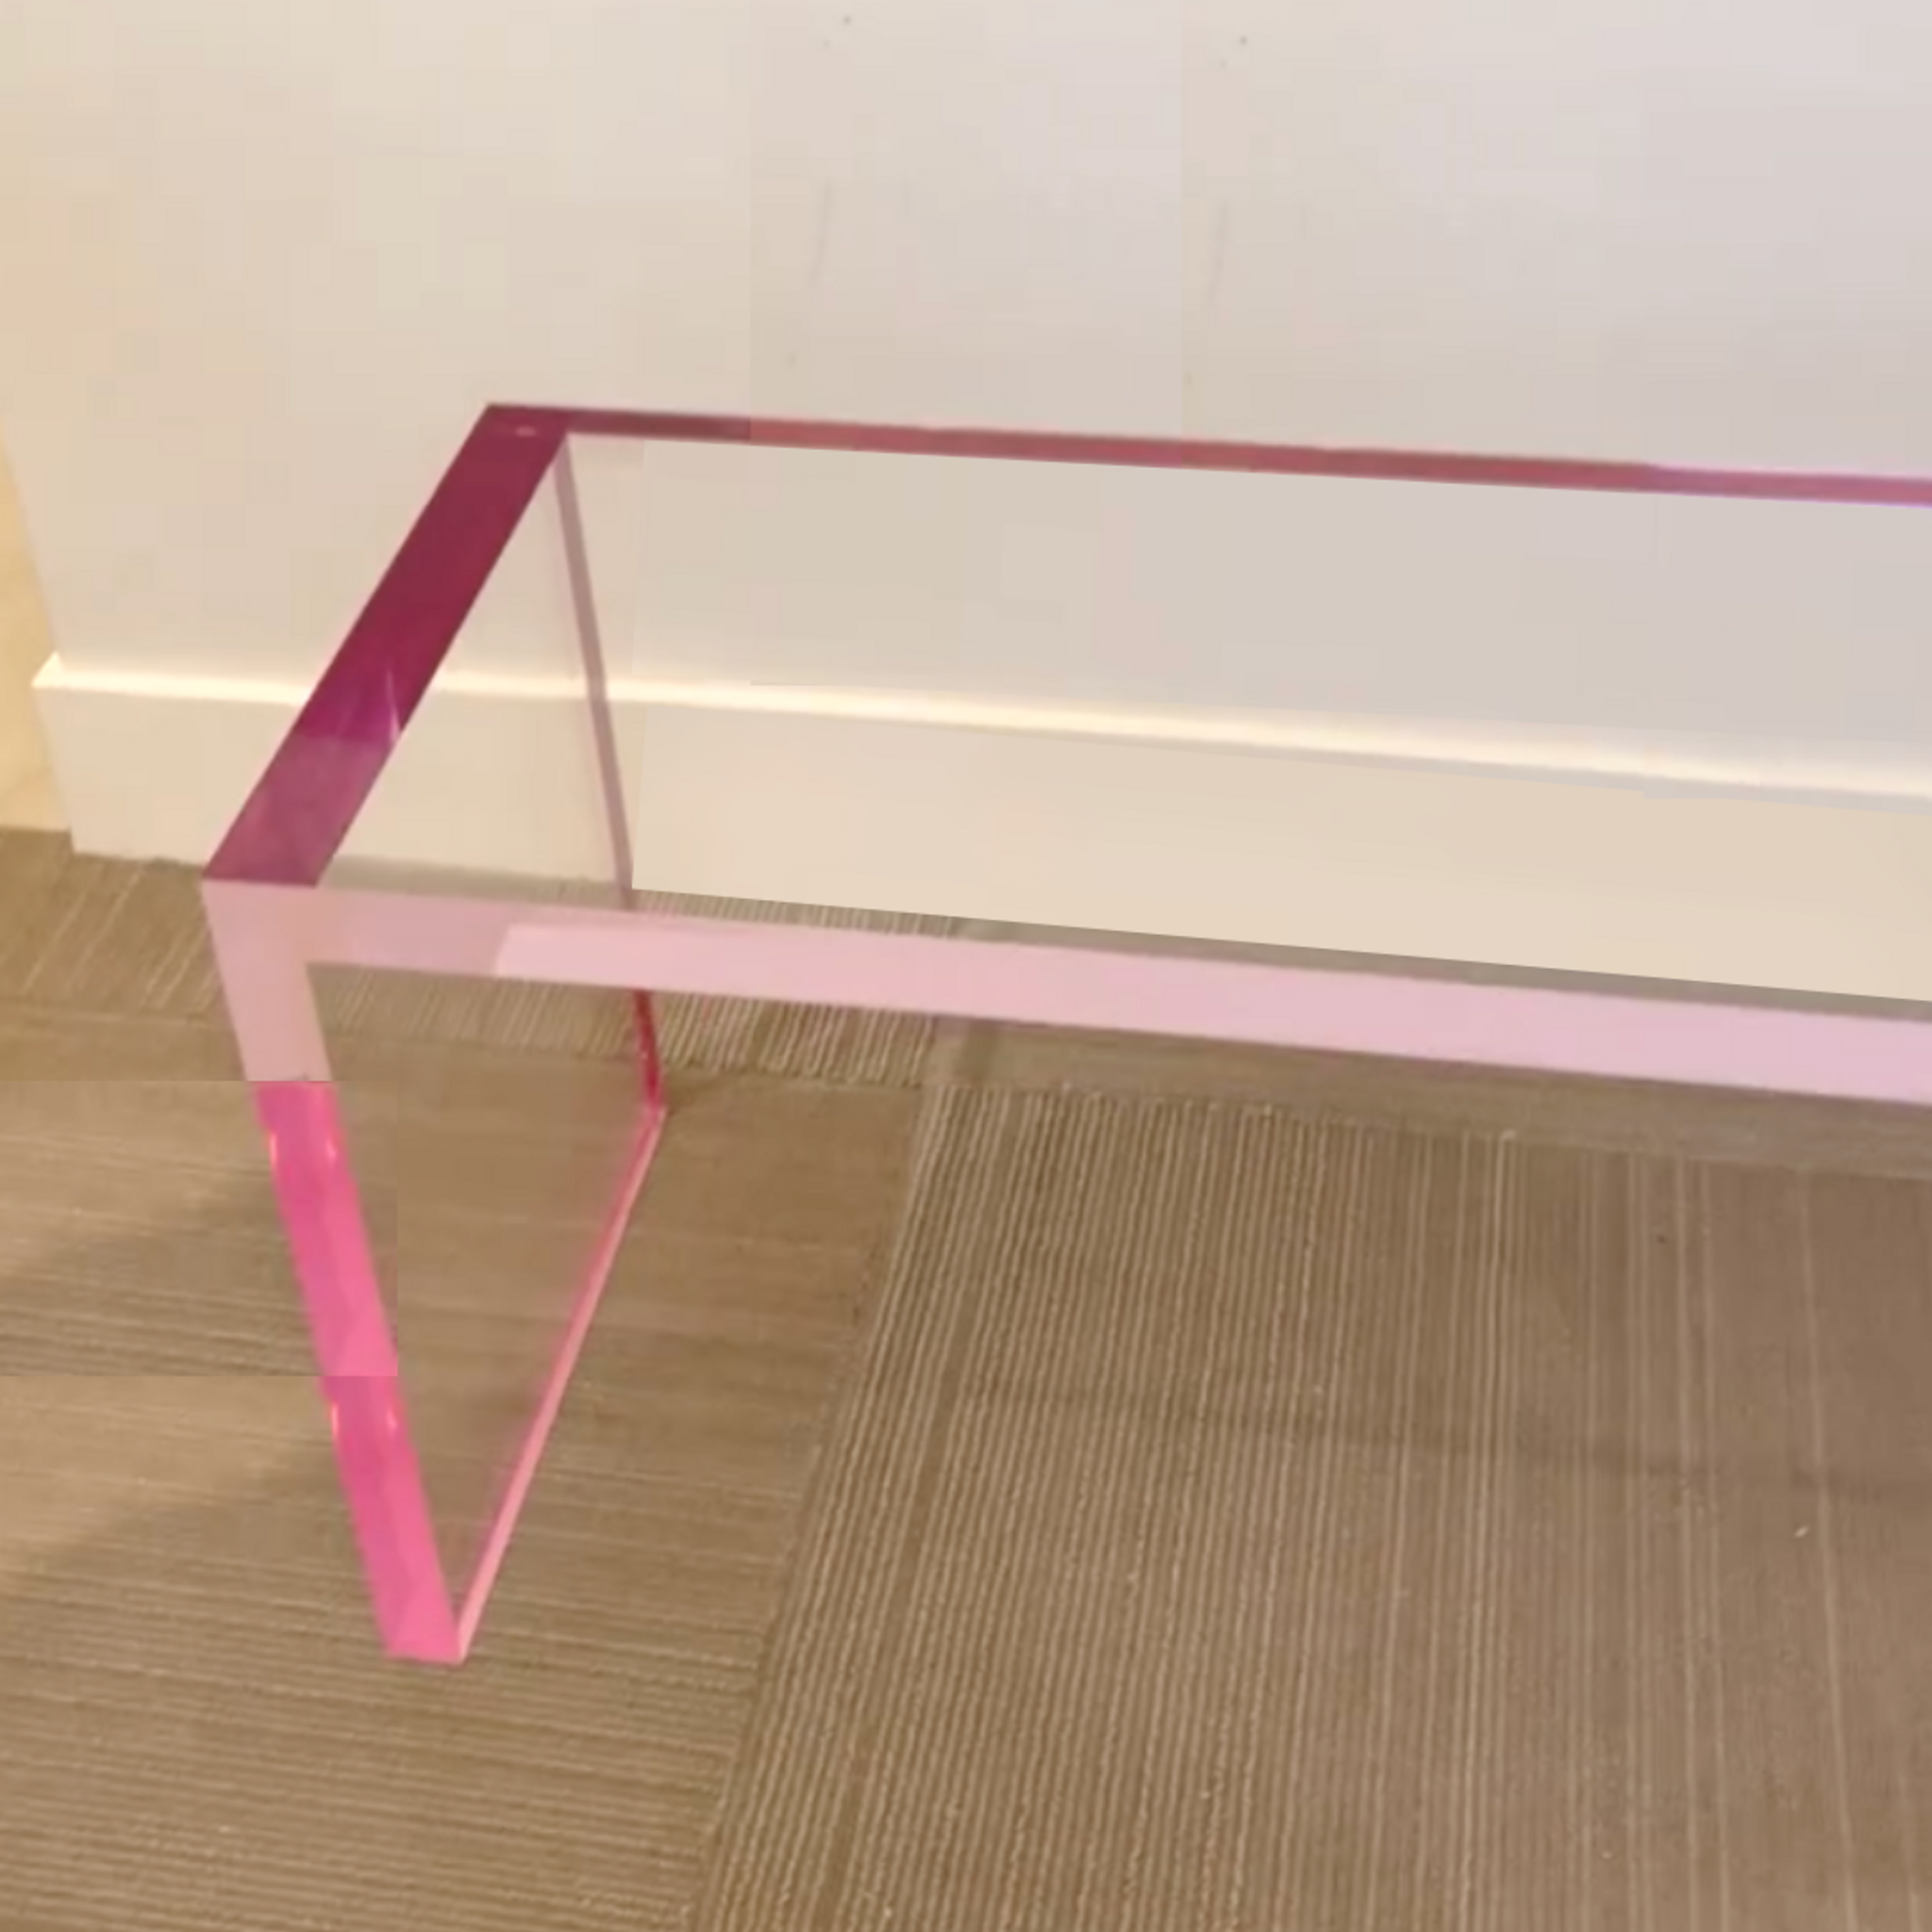 lucite Color Edge Slab Coffee Table 